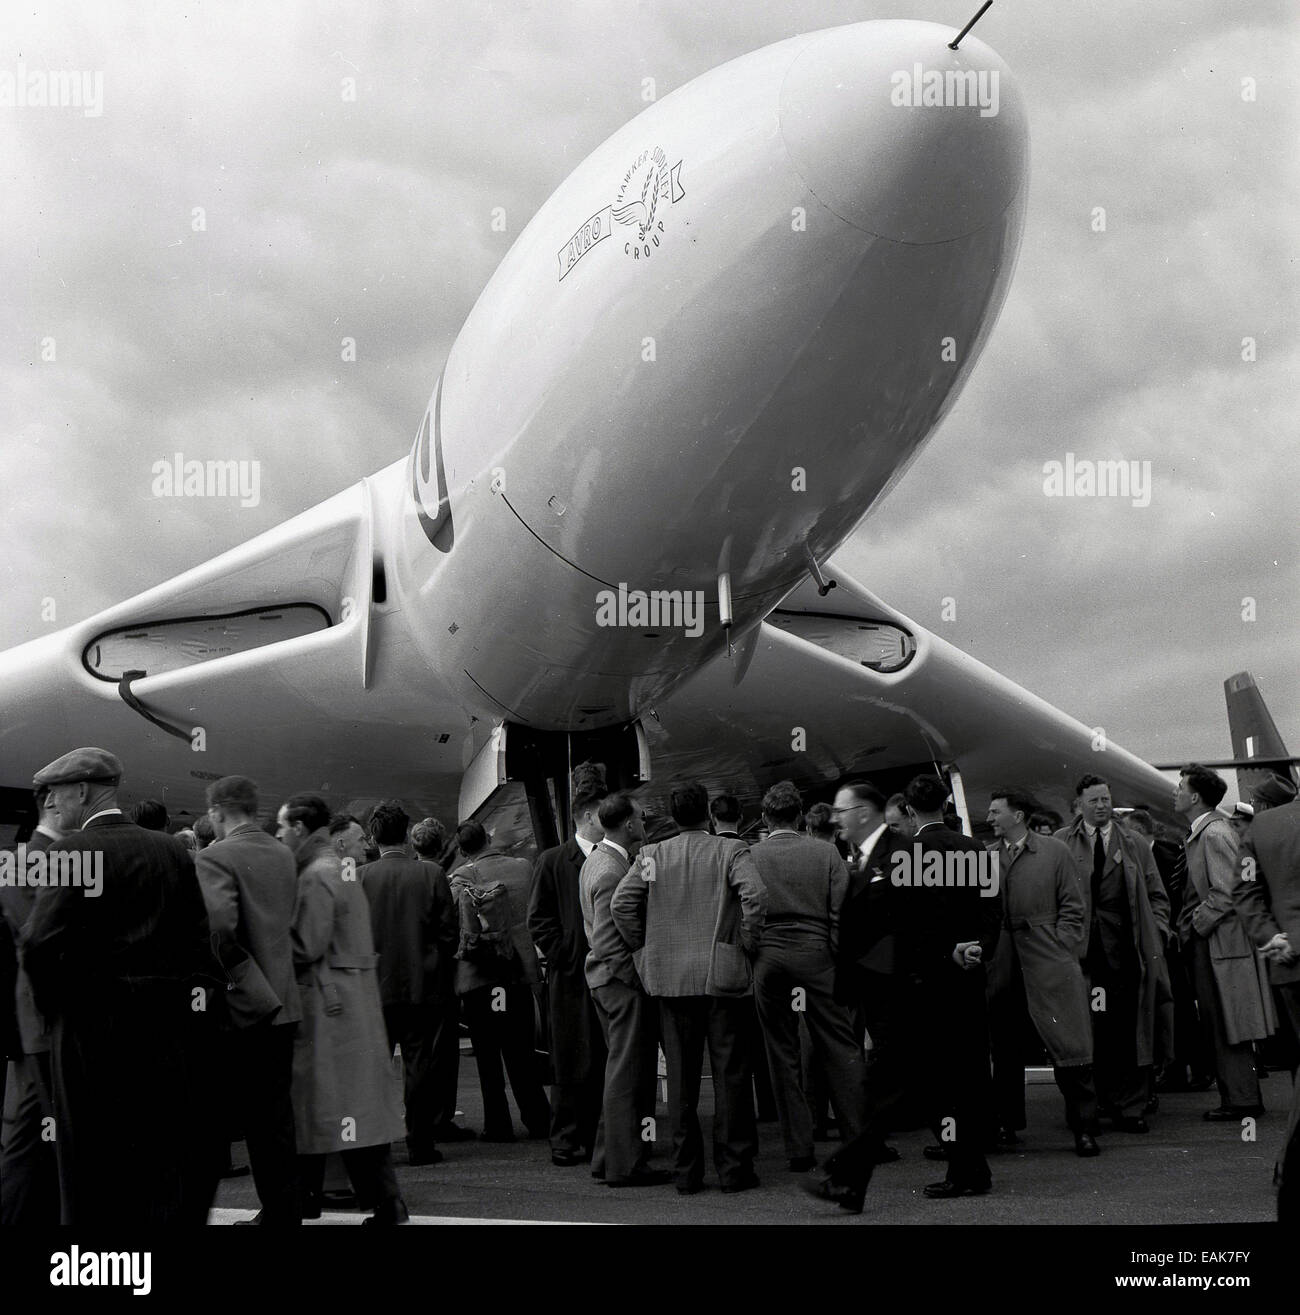 1950s, historical, members of the press congregate outside underneath the cockpit of the new fighter jet-powered delta wing strategic bomber, The Avro Vulcan B.2, at its press launch, England, UK. Stock Photo